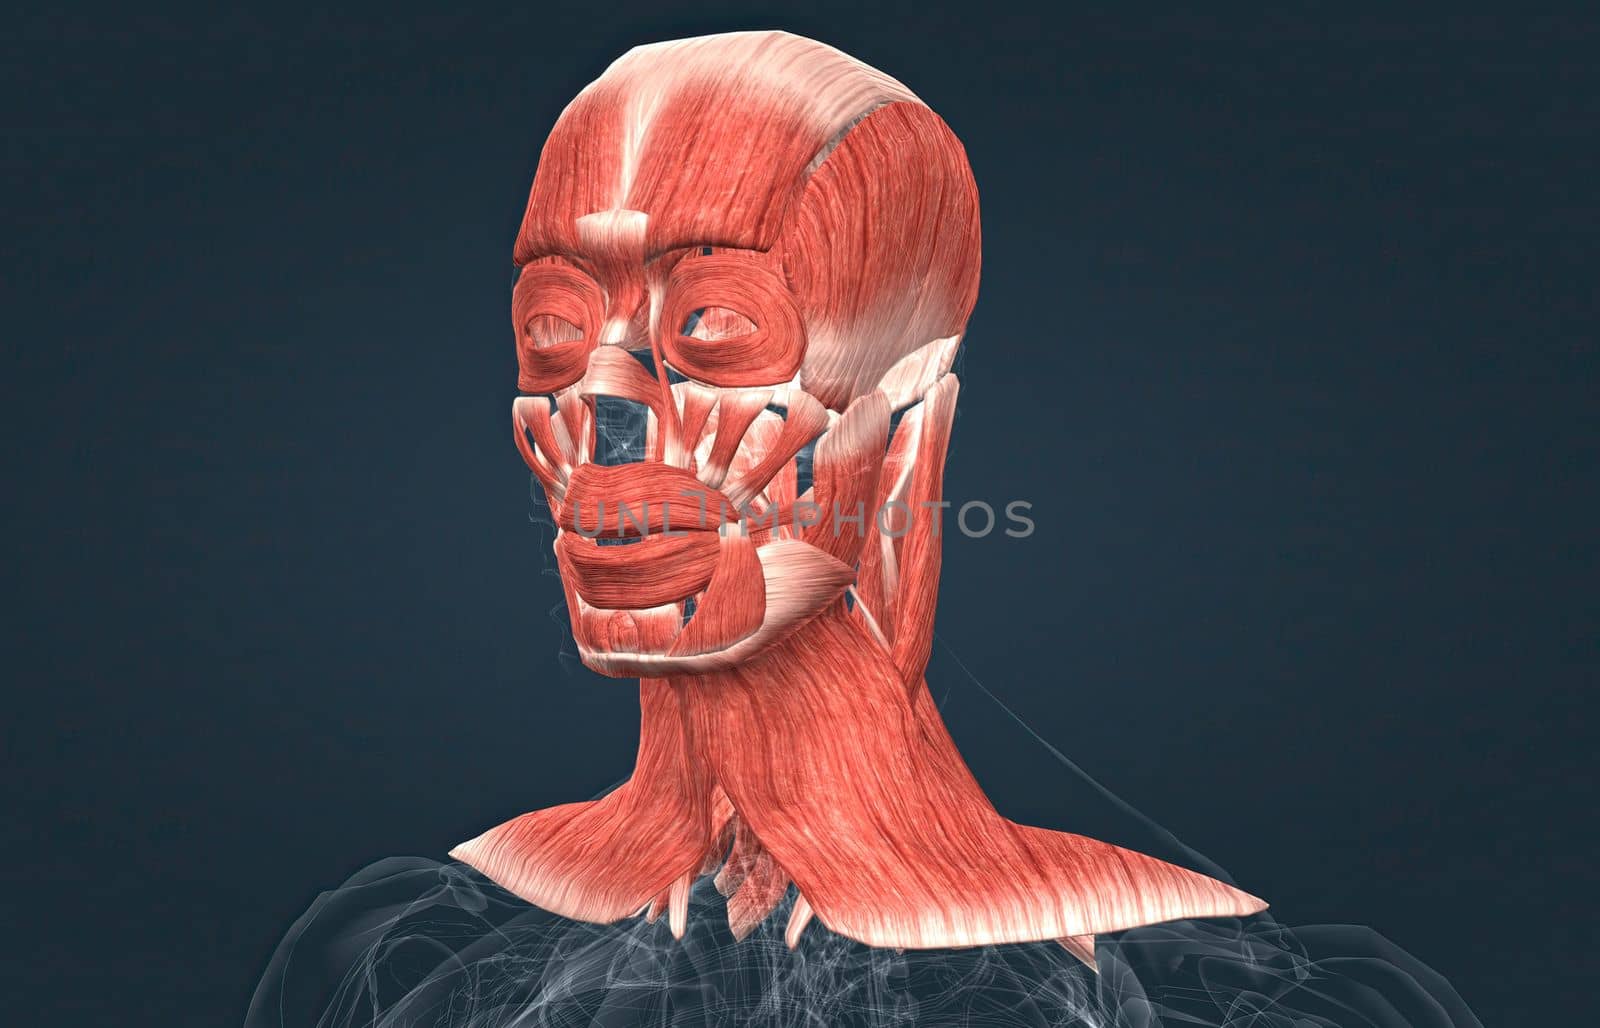 Anatomy of male head muscular system by creativepic